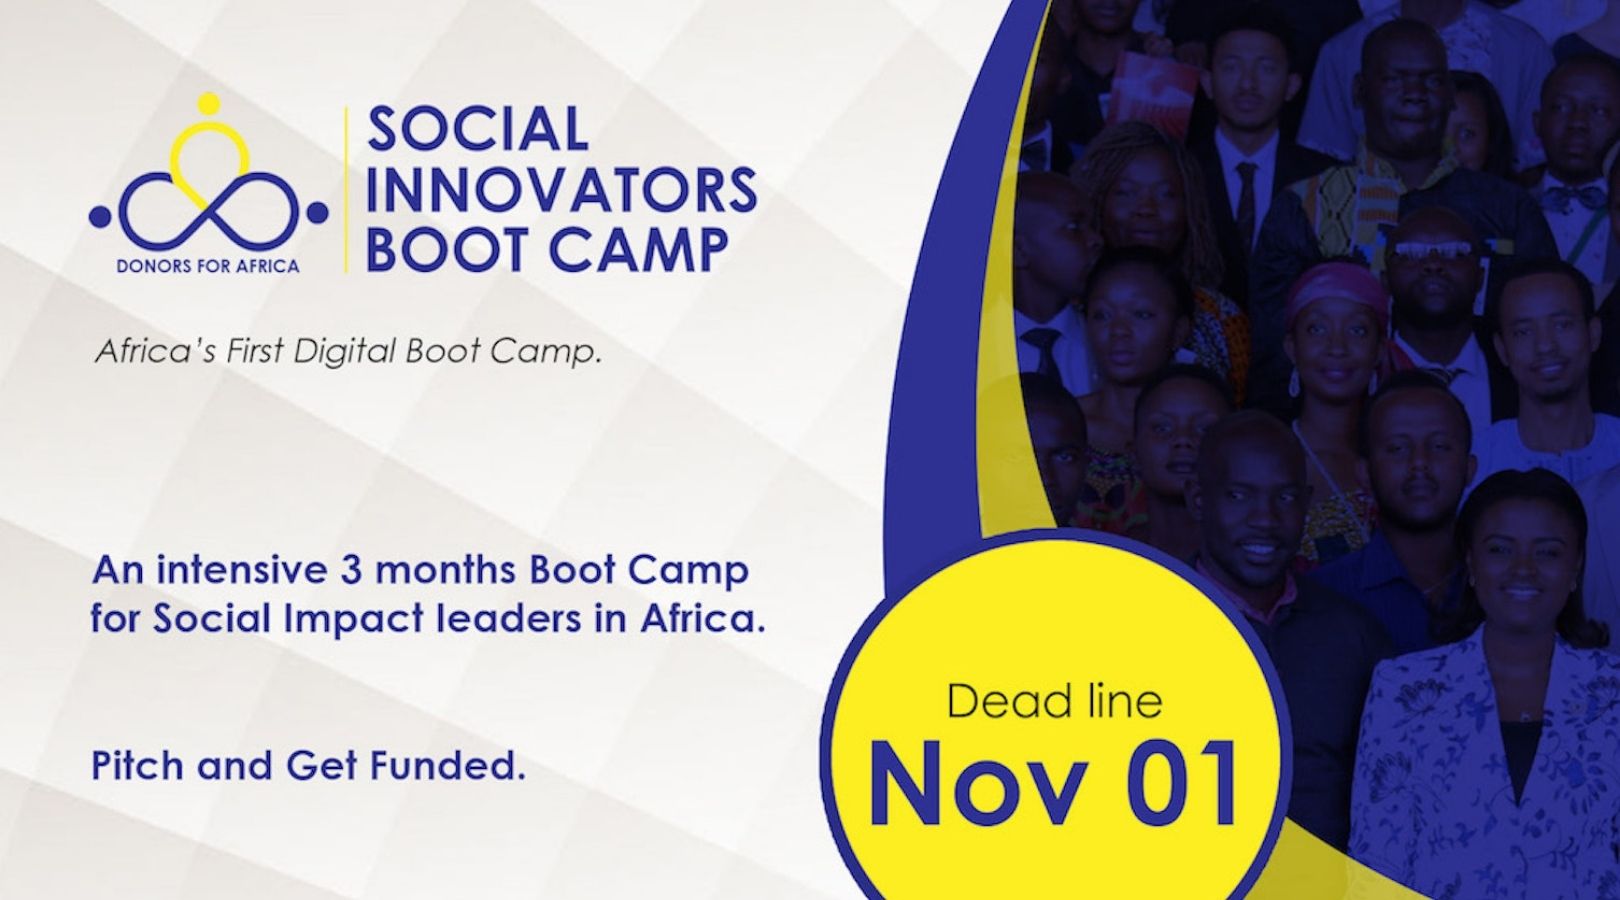 Donors For Africa Social Innovators Bootcamp 2020 (Pitch and Get Funded)